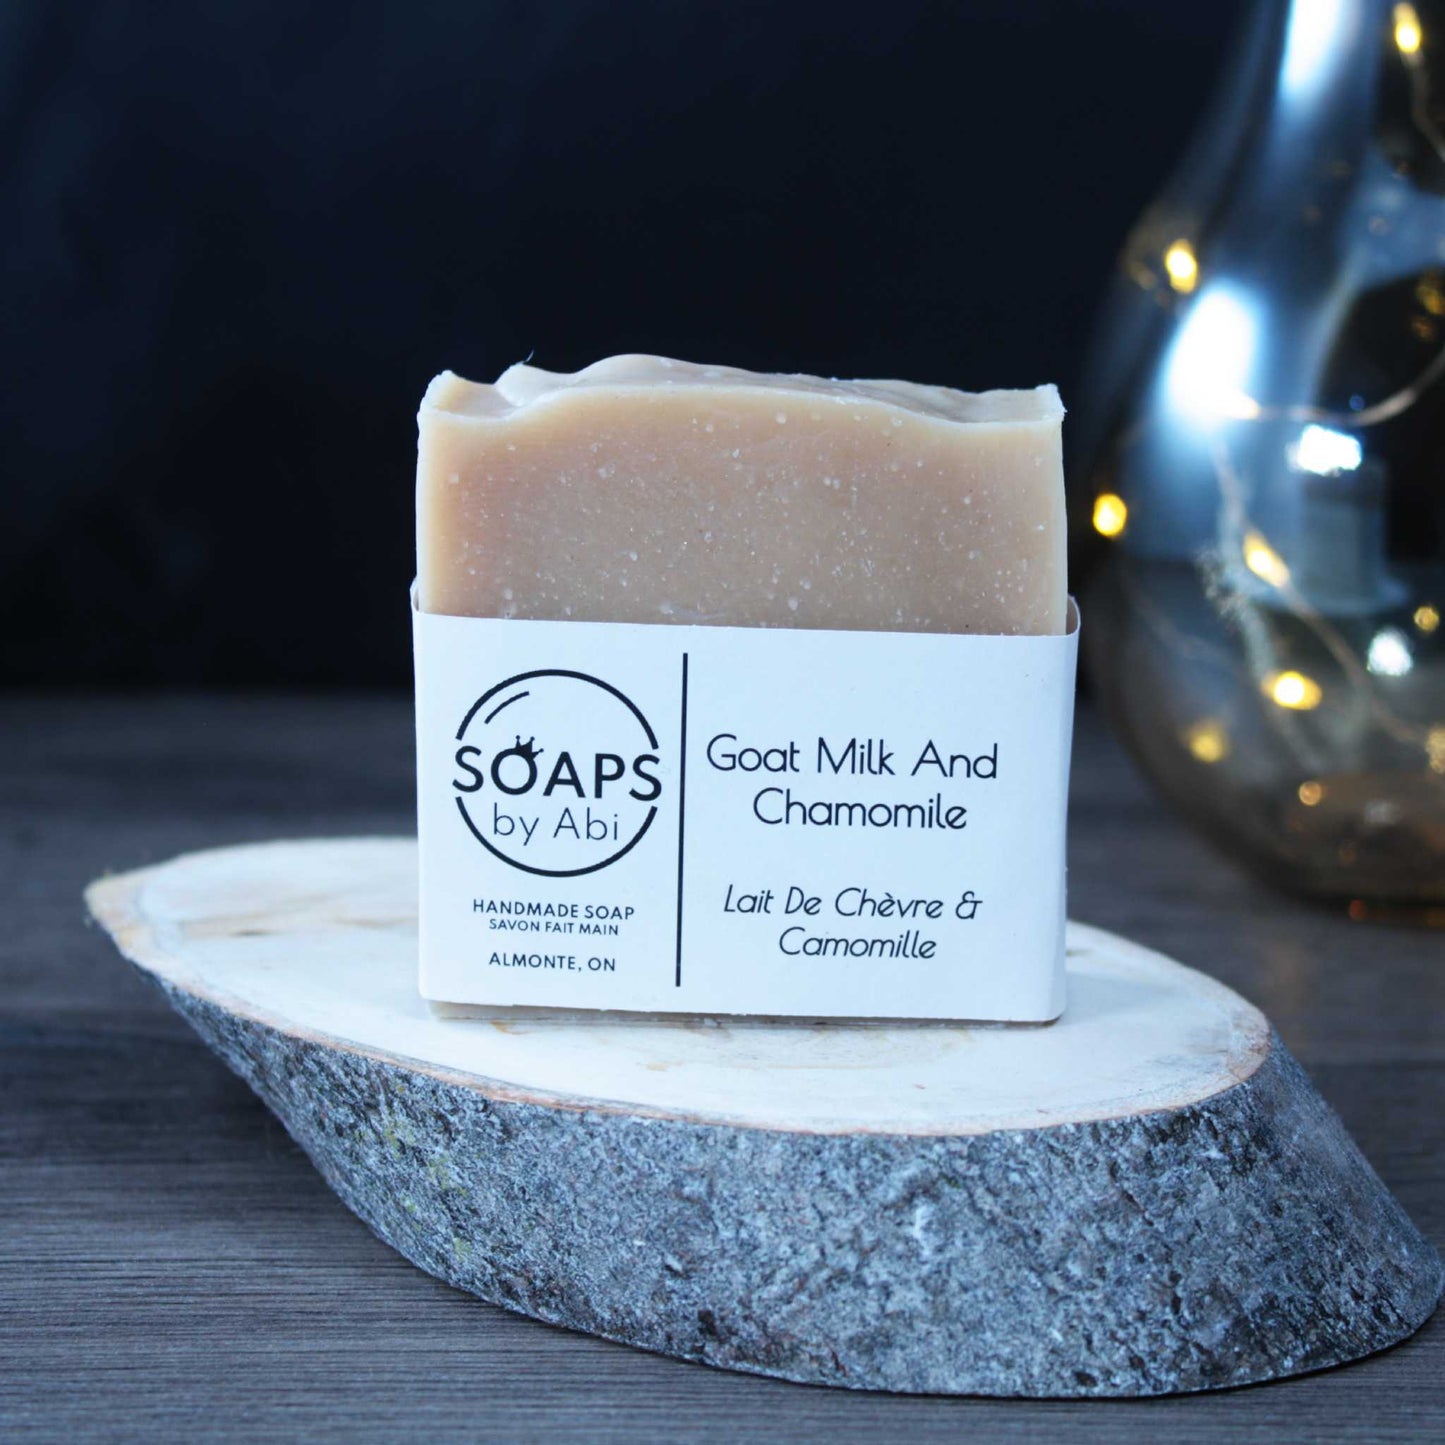 Goat Milk and Chamomile soap Soaps by Abi homemade in almonte ontario